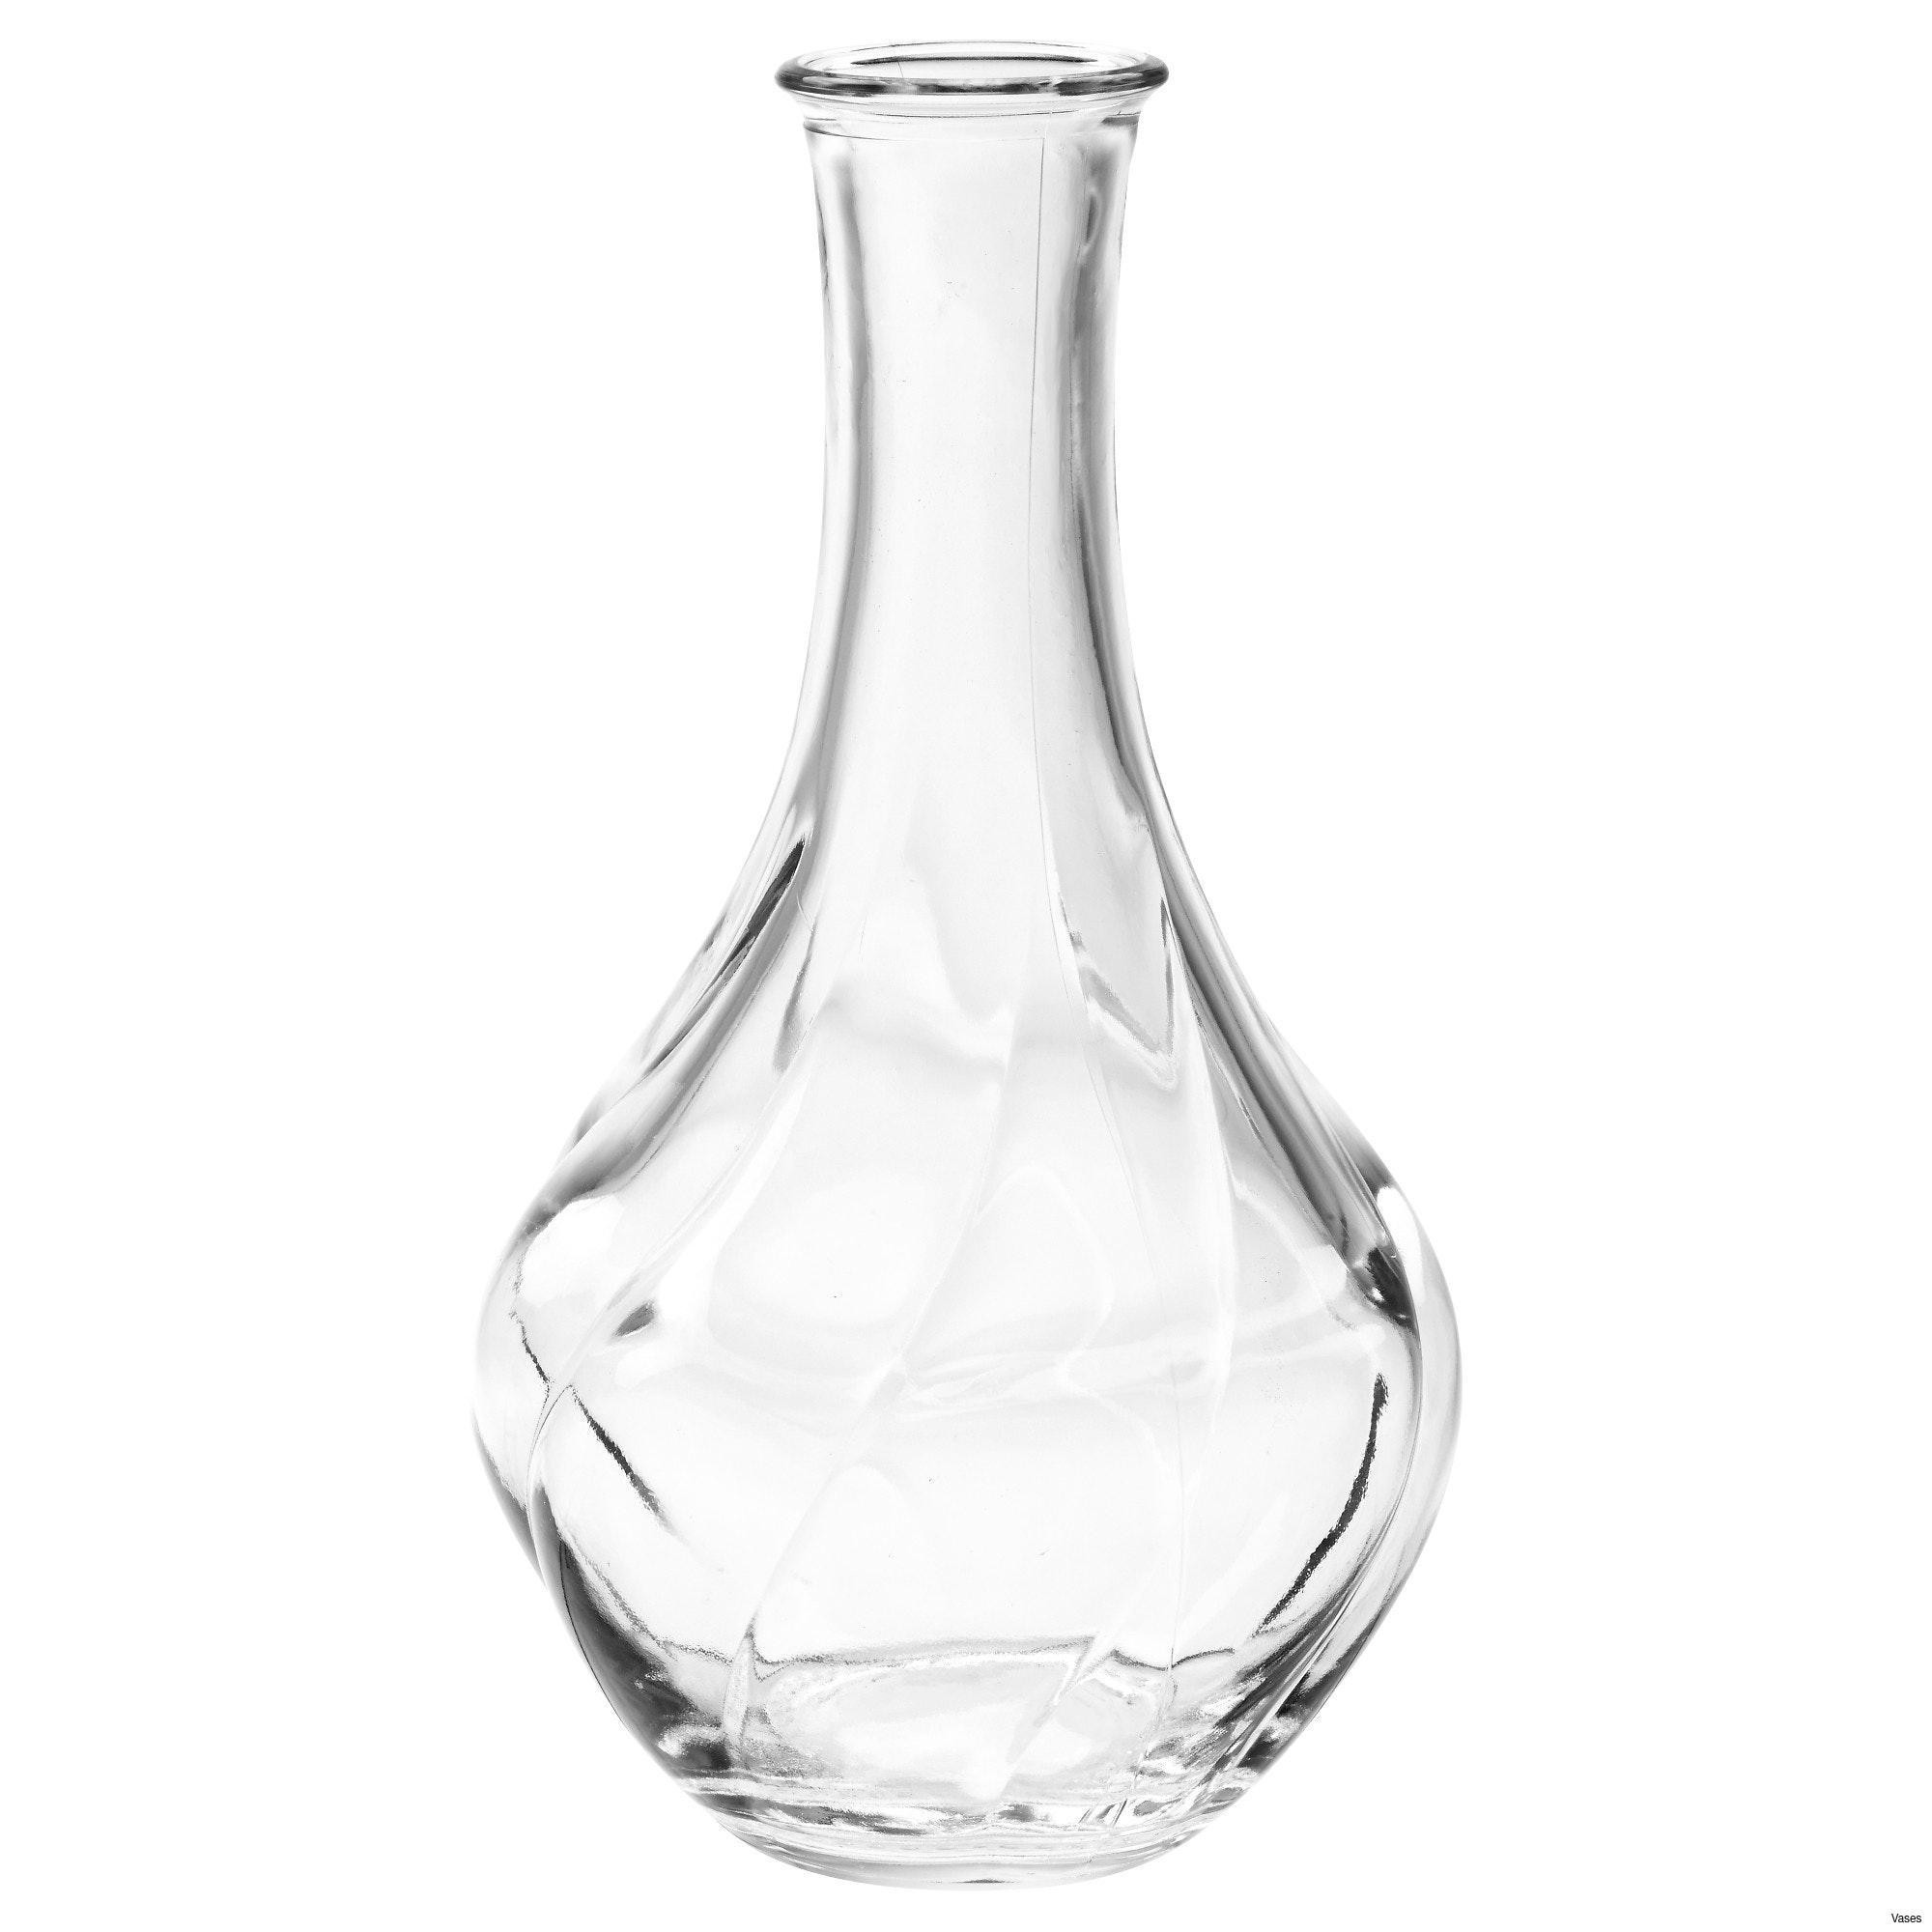 5 Inch Tall Cylinder Vase Of Glass Vases with Lids Image Living Room Glass Vases Fresh Clear Vase Intended for Glass Vases with Lids Image Living Room Glass Vases Fresh Clear Vase 0d Tags Amazing and